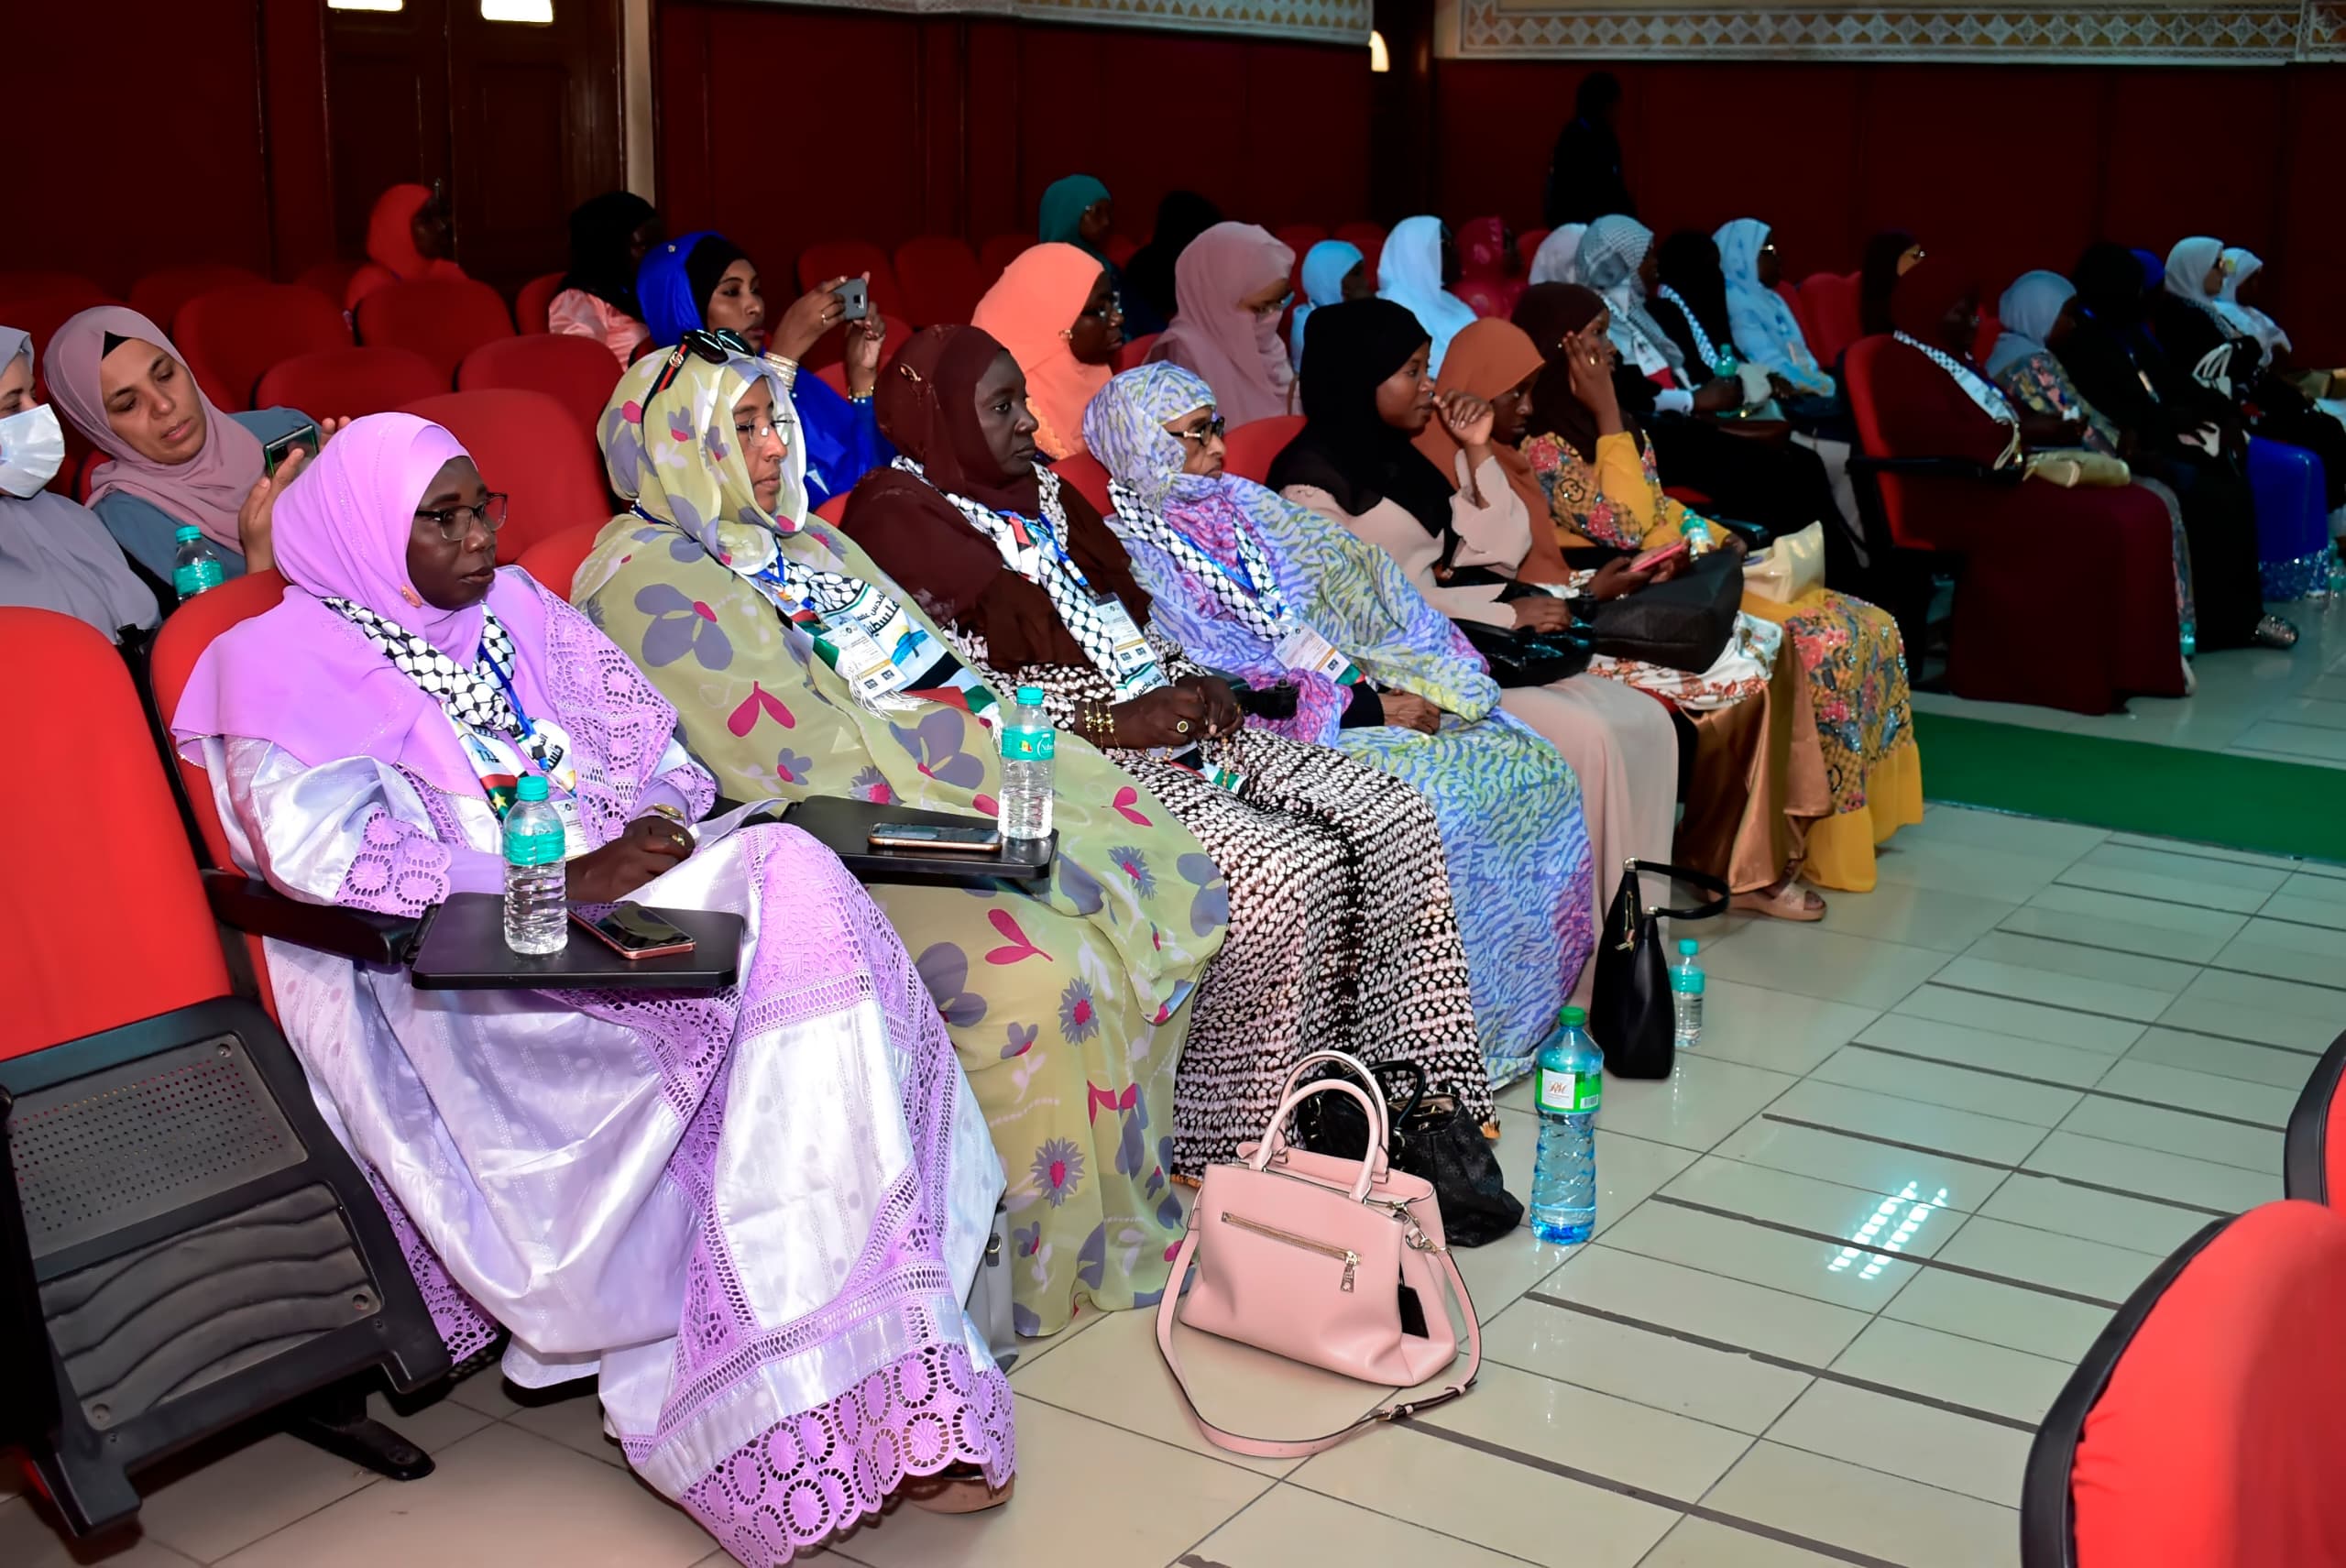 Global Women’s Coalition for Quds and Palestine Holds Regional Forum in West Africa